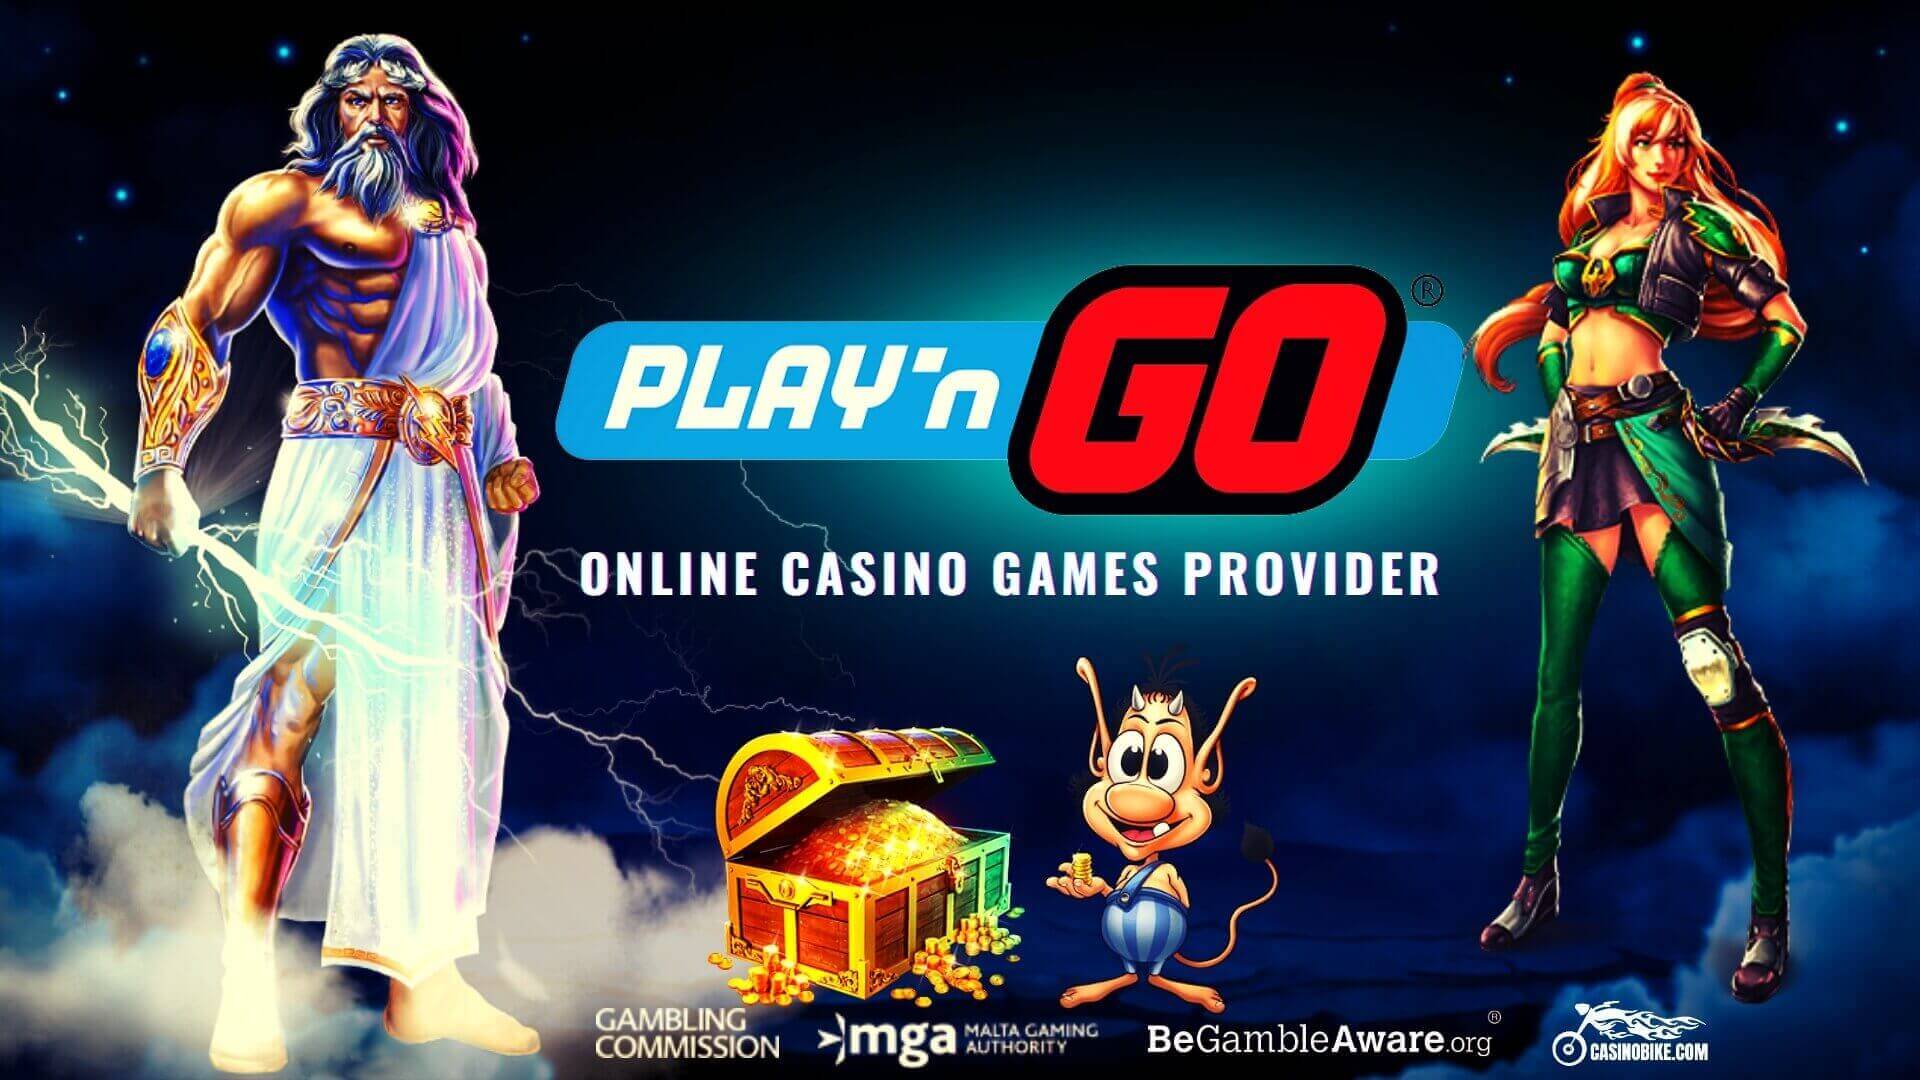 Play'n GO Casino Games Provider Review